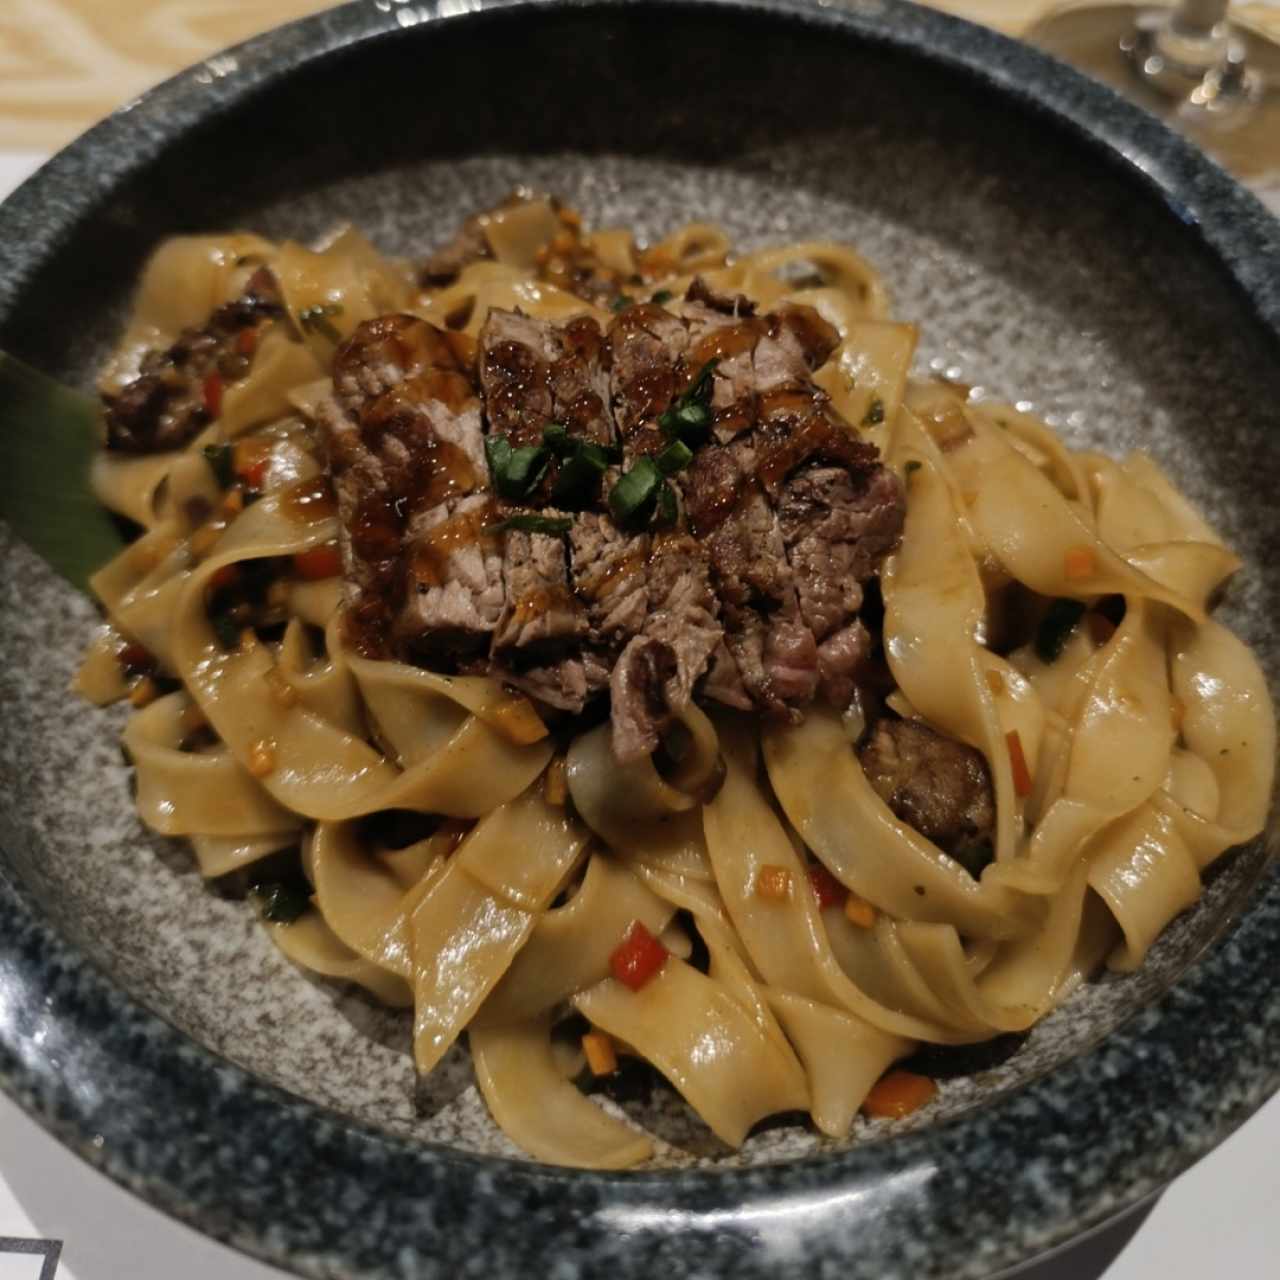 Noodles with beef